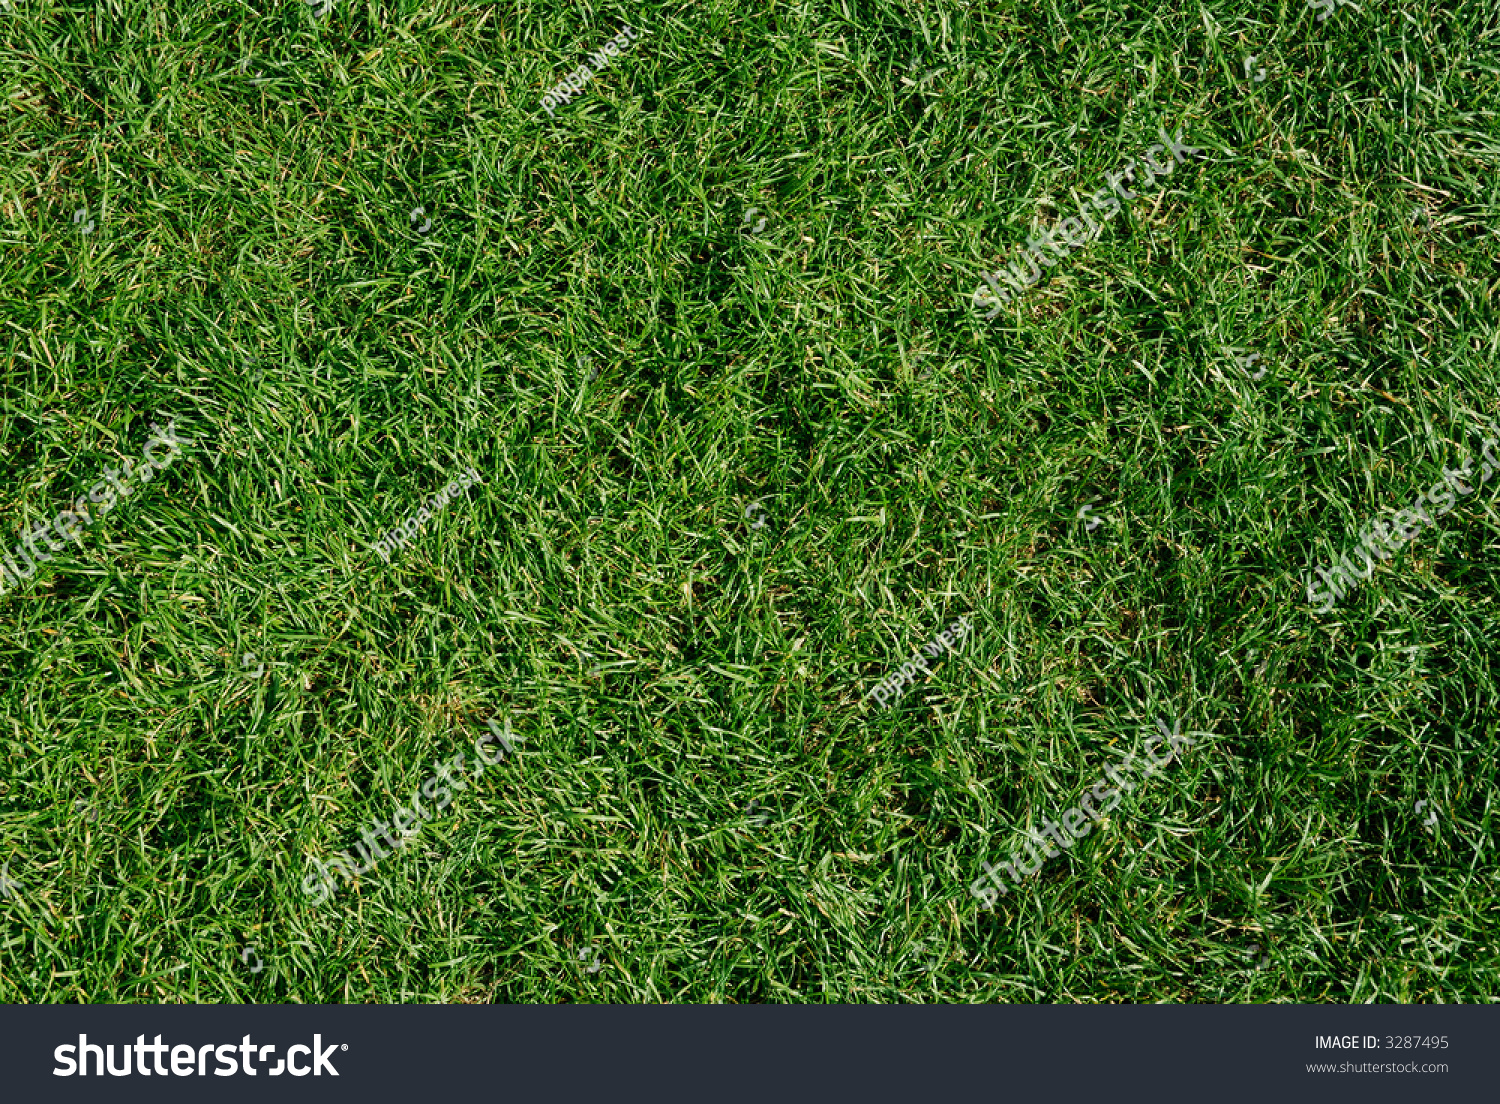 Close Up Of Freshly Cut Green Grass Lawn Background Stock Photo 3287495